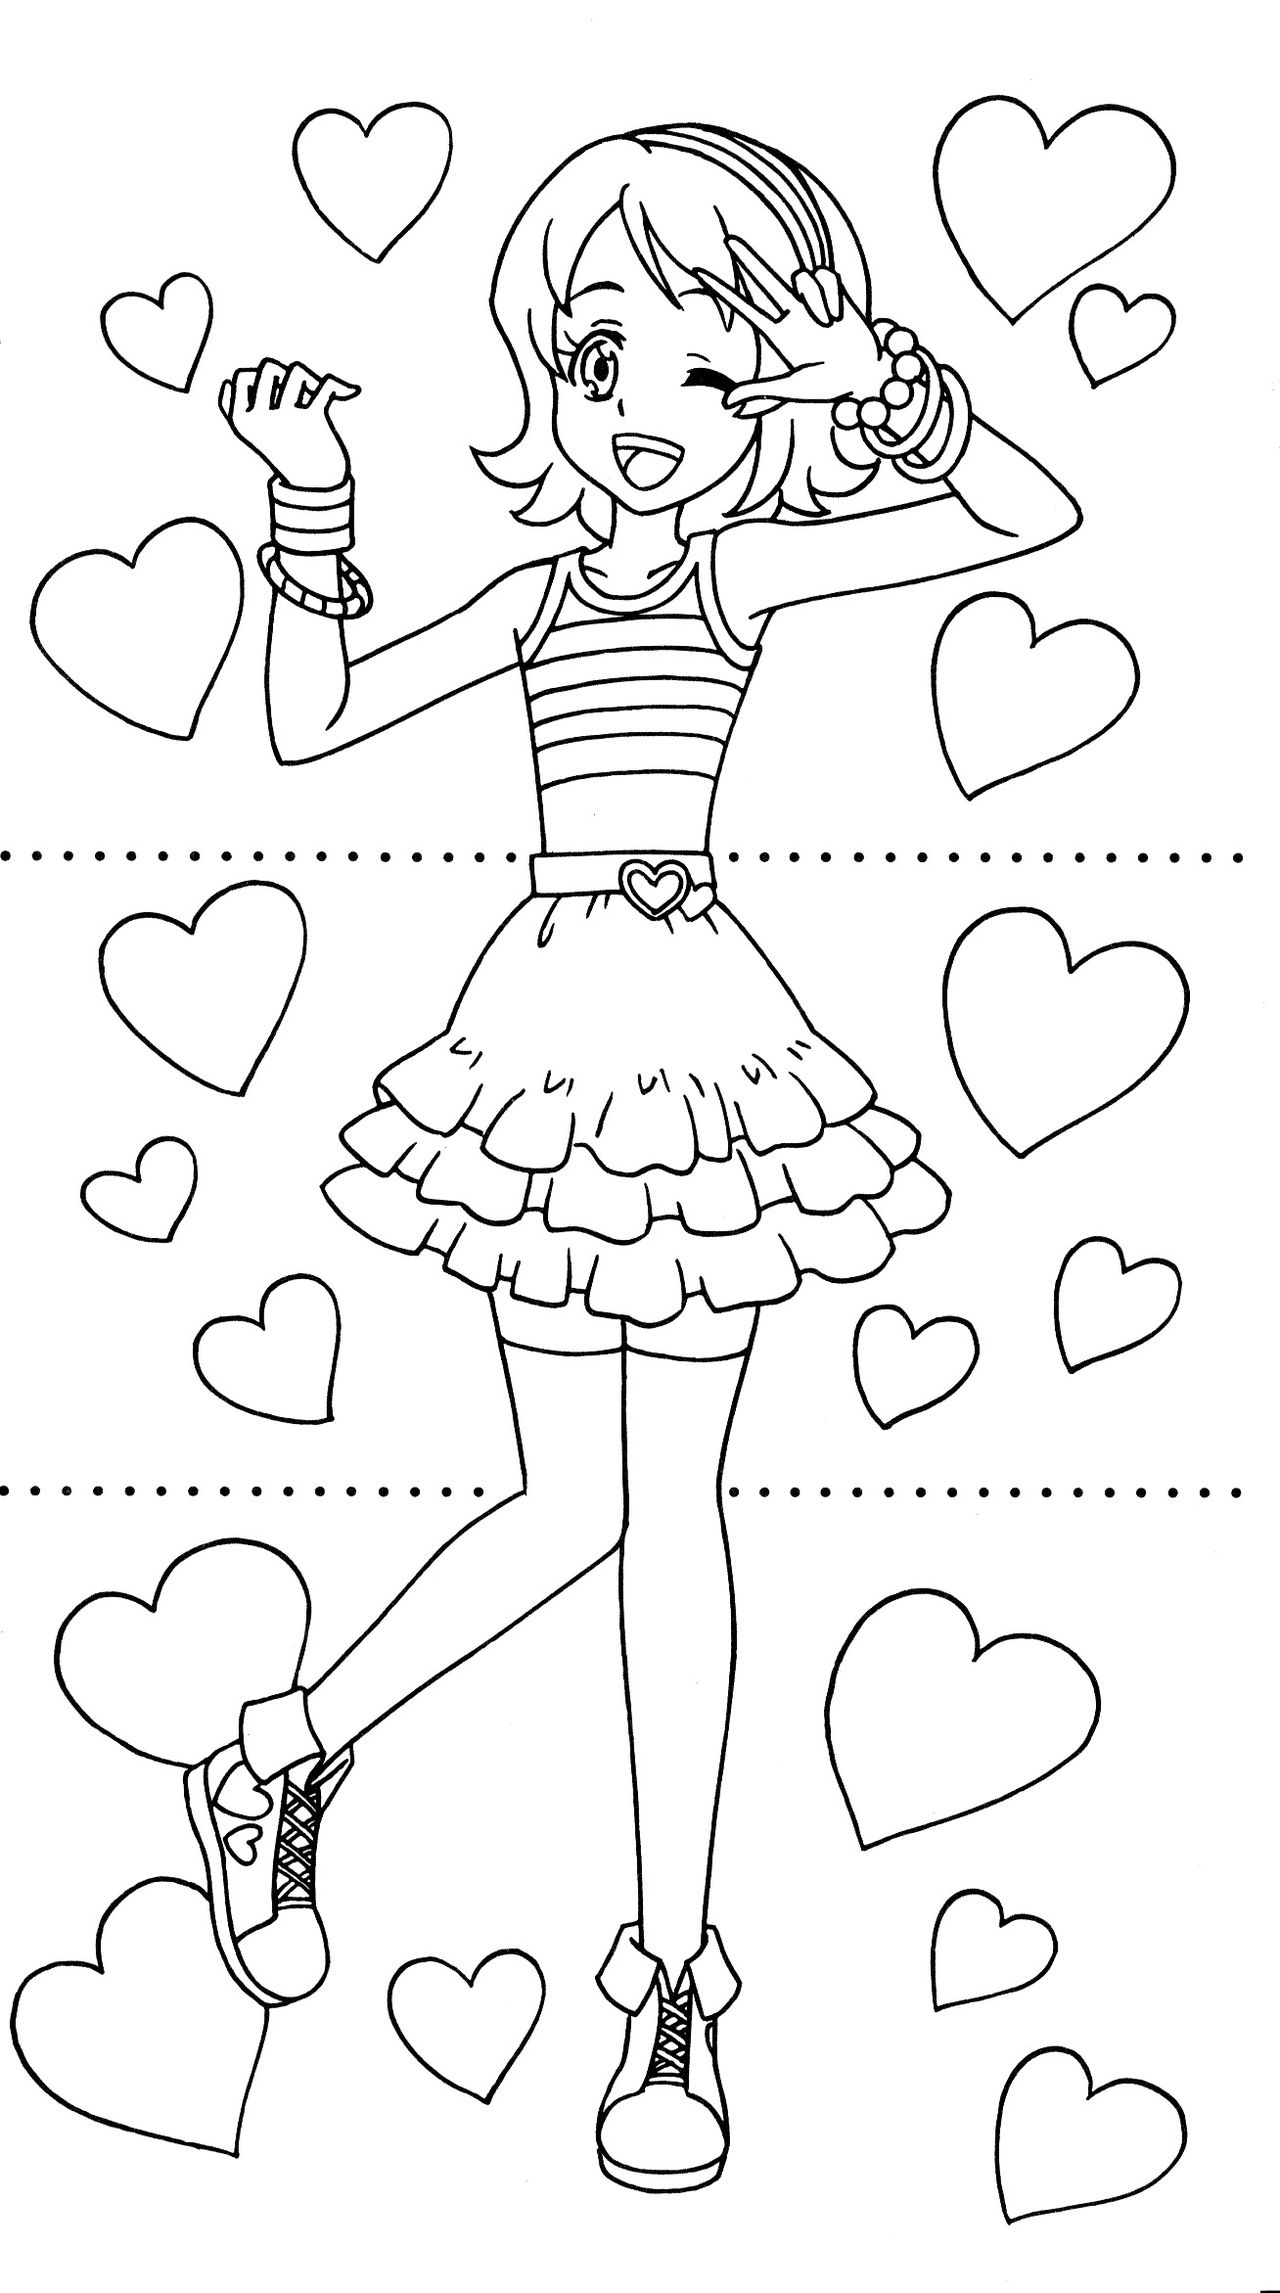 Happiness Charge Precure Dressup Coloring Book 33